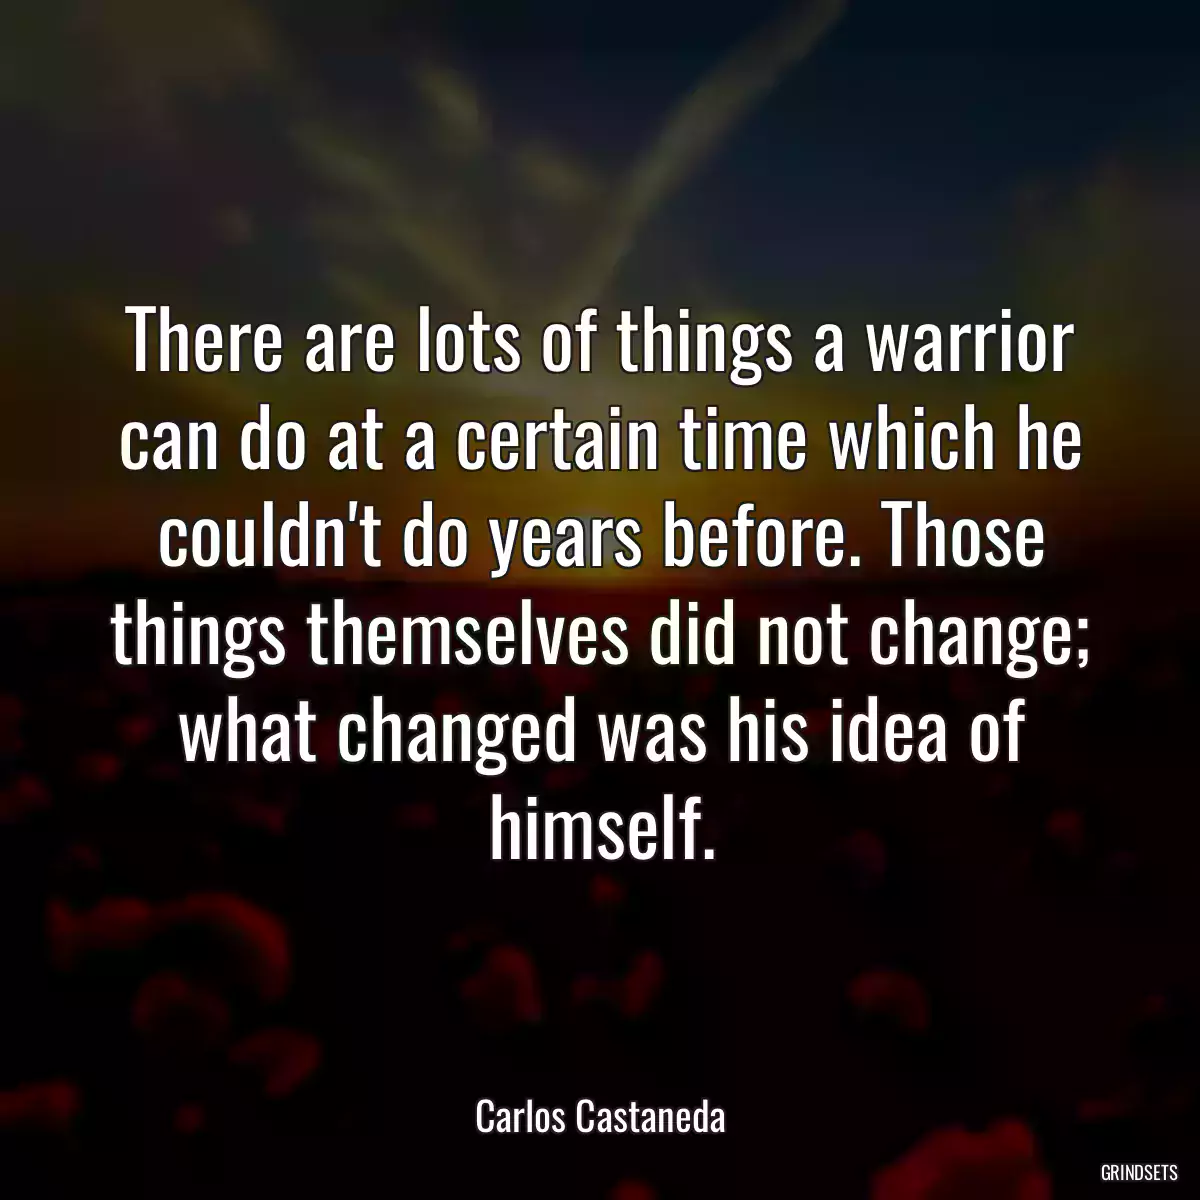 There are lots of things a warrior can do at a certain time which he couldn\'t do years before. Those things themselves did not change; what changed was his idea of himself.